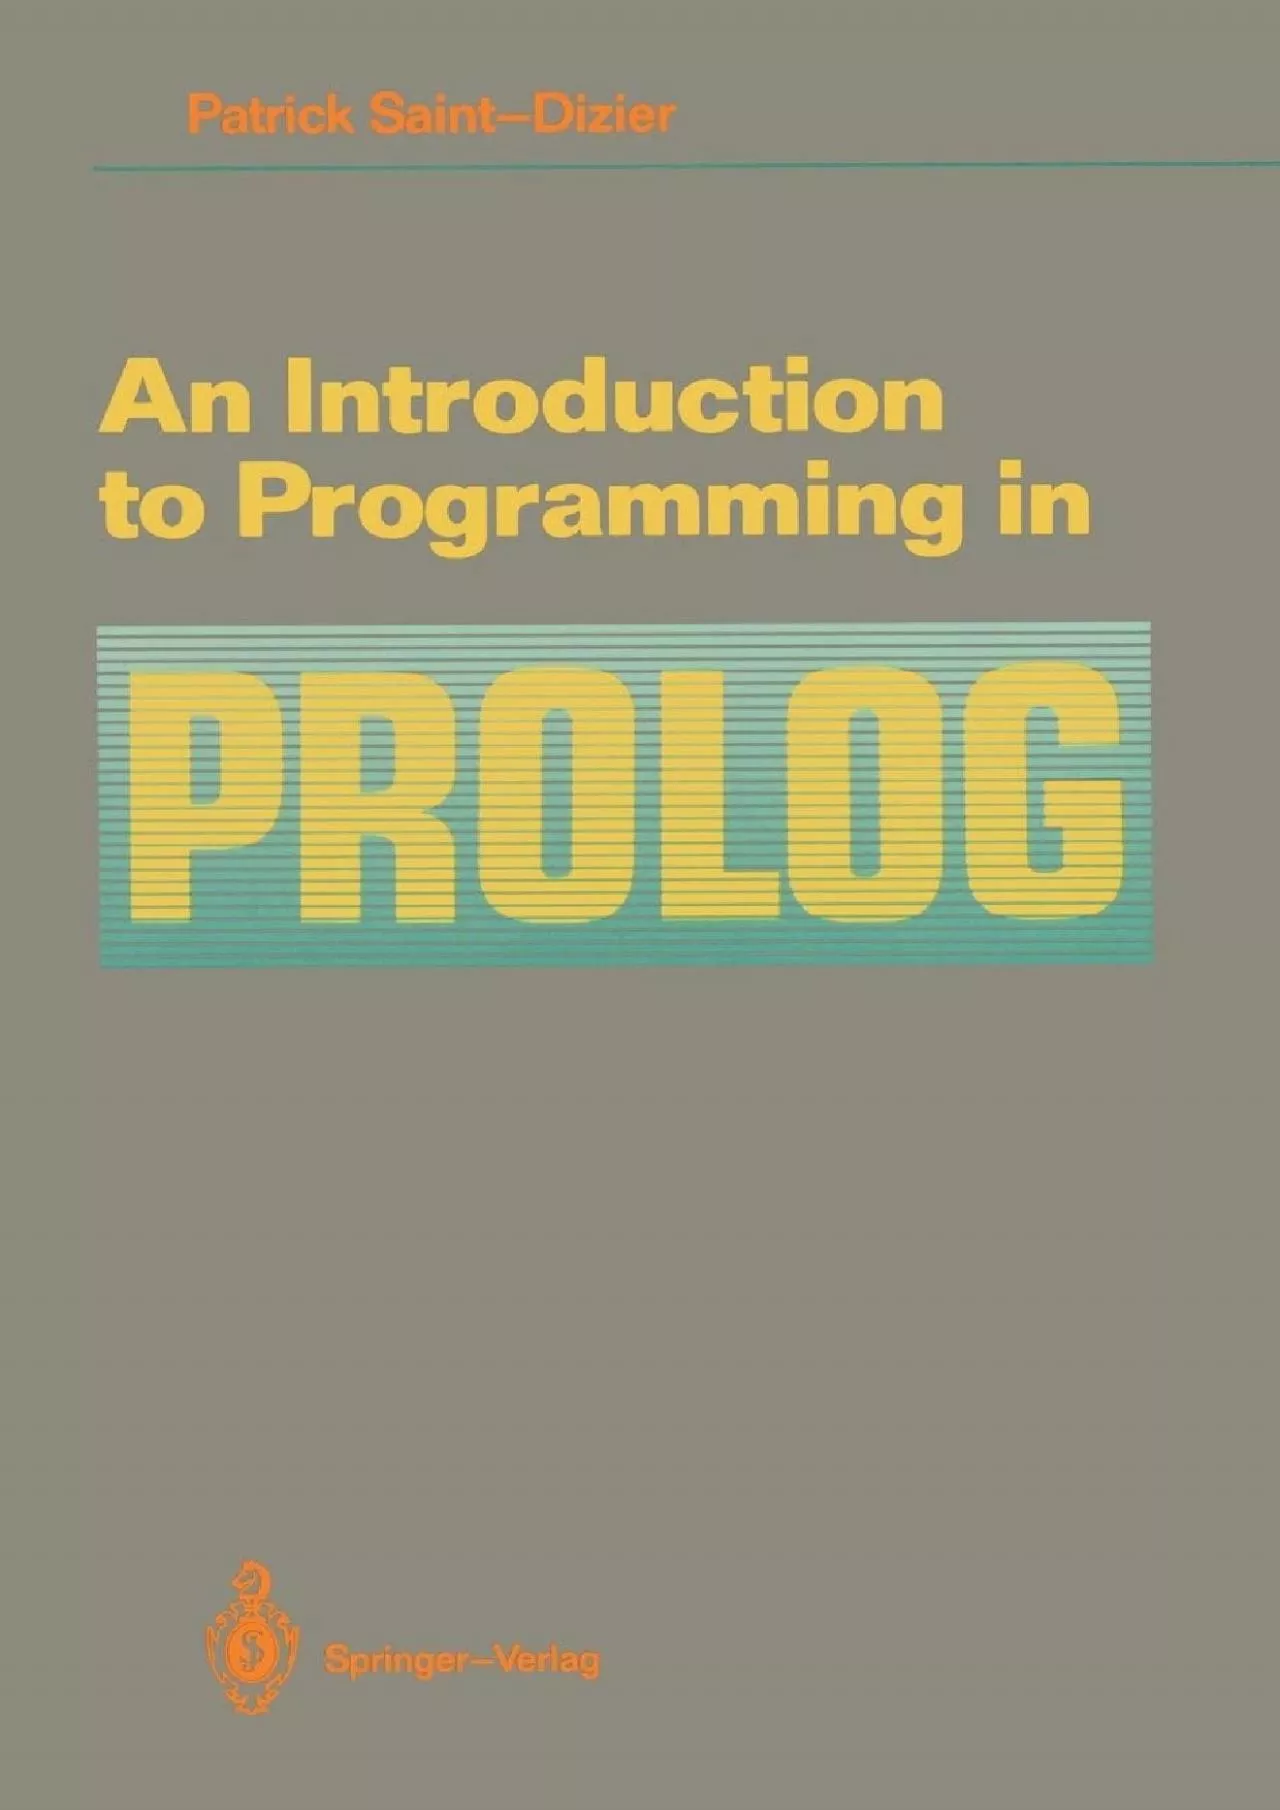 [READING BOOK]-An Introduction to Programming in Prolog